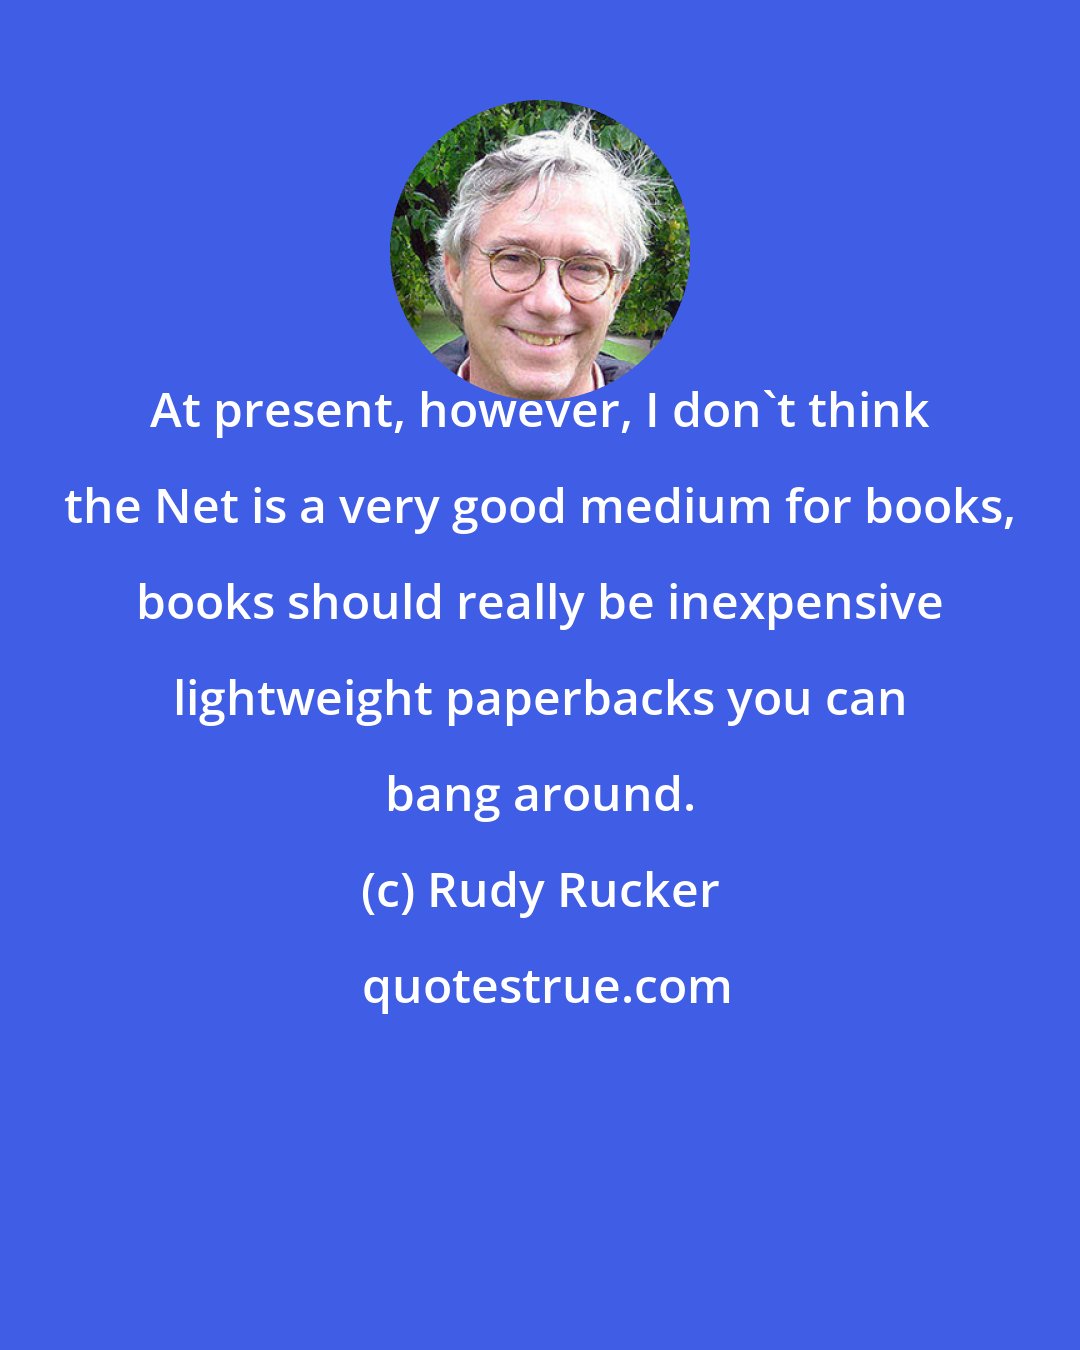 Rudy Rucker: At present, however, I don't think the Net is a very good medium for books, books should really be inexpensive lightweight paperbacks you can bang around.